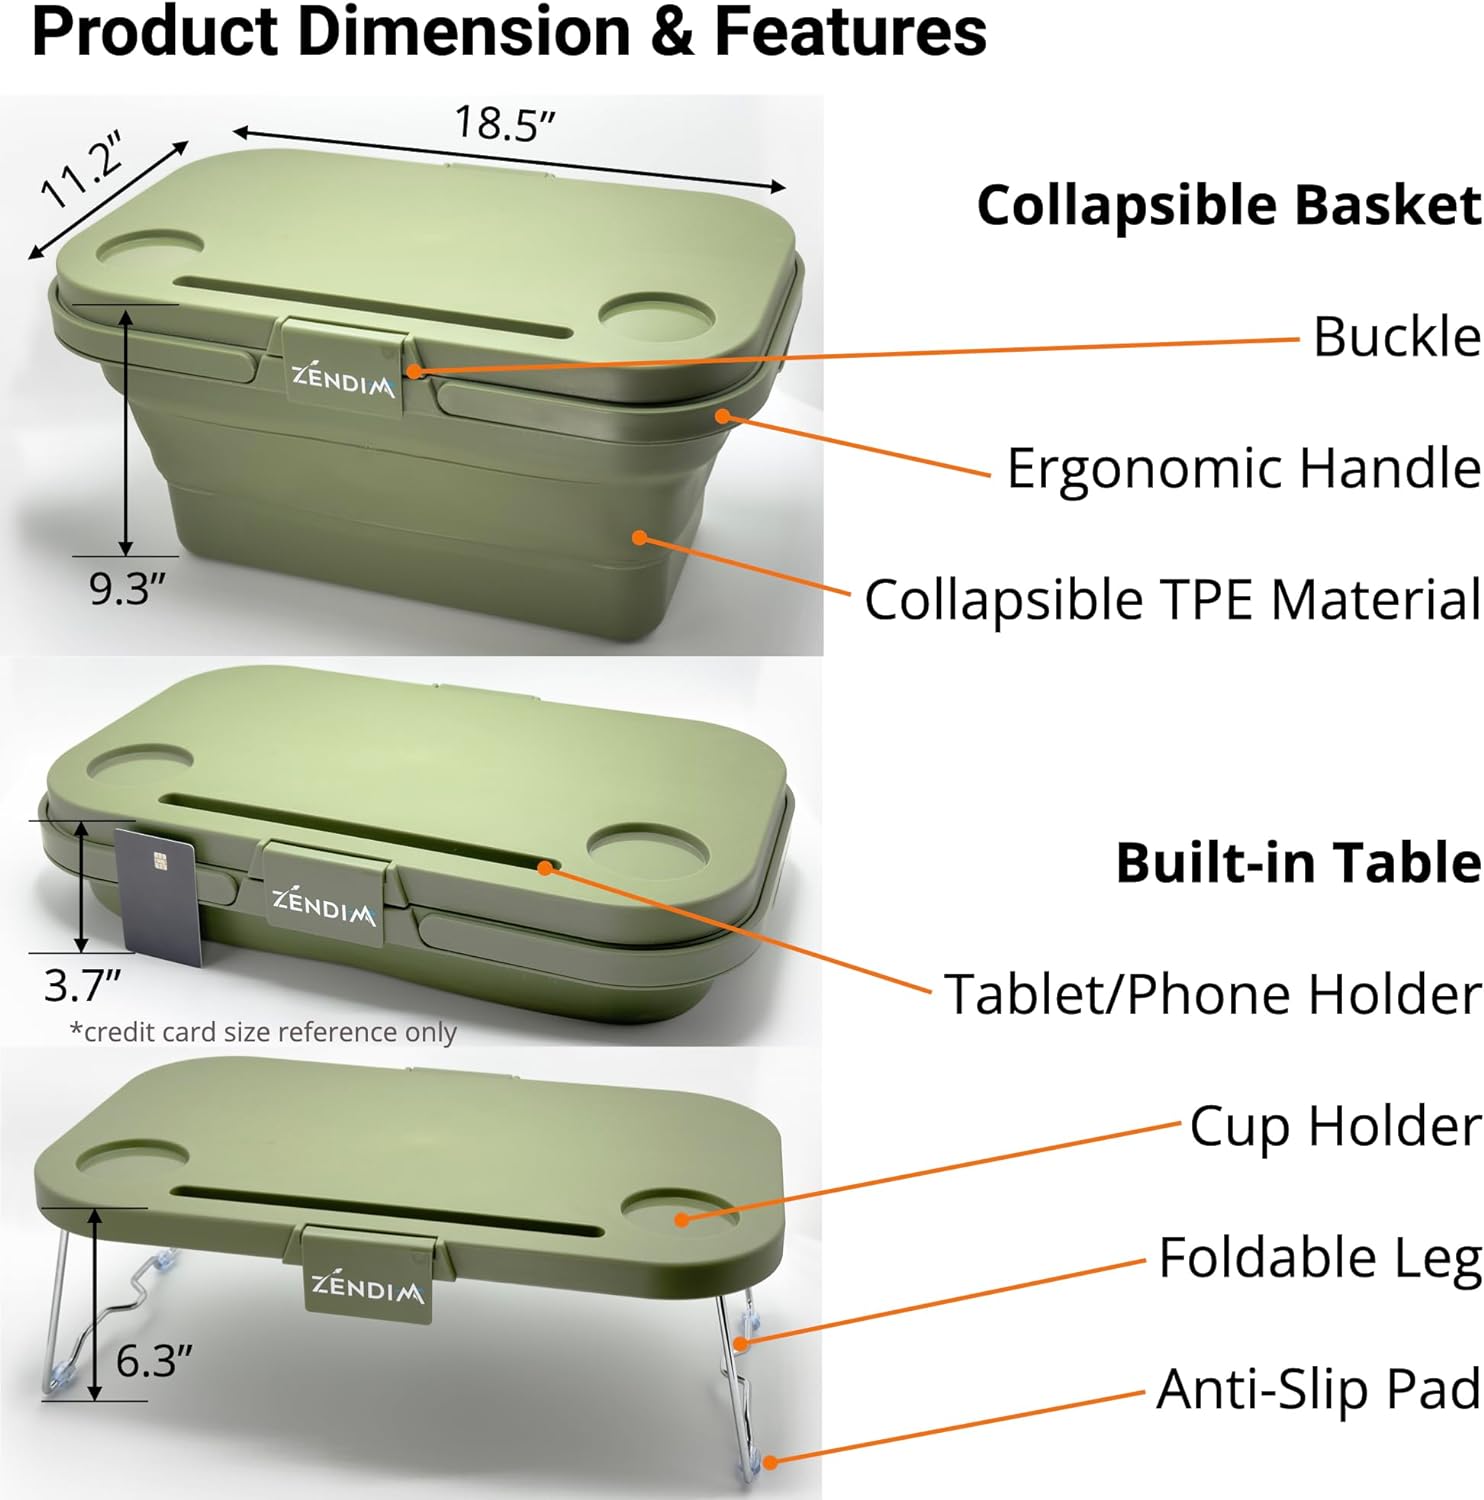 Collapsible Basket with Built-in Table